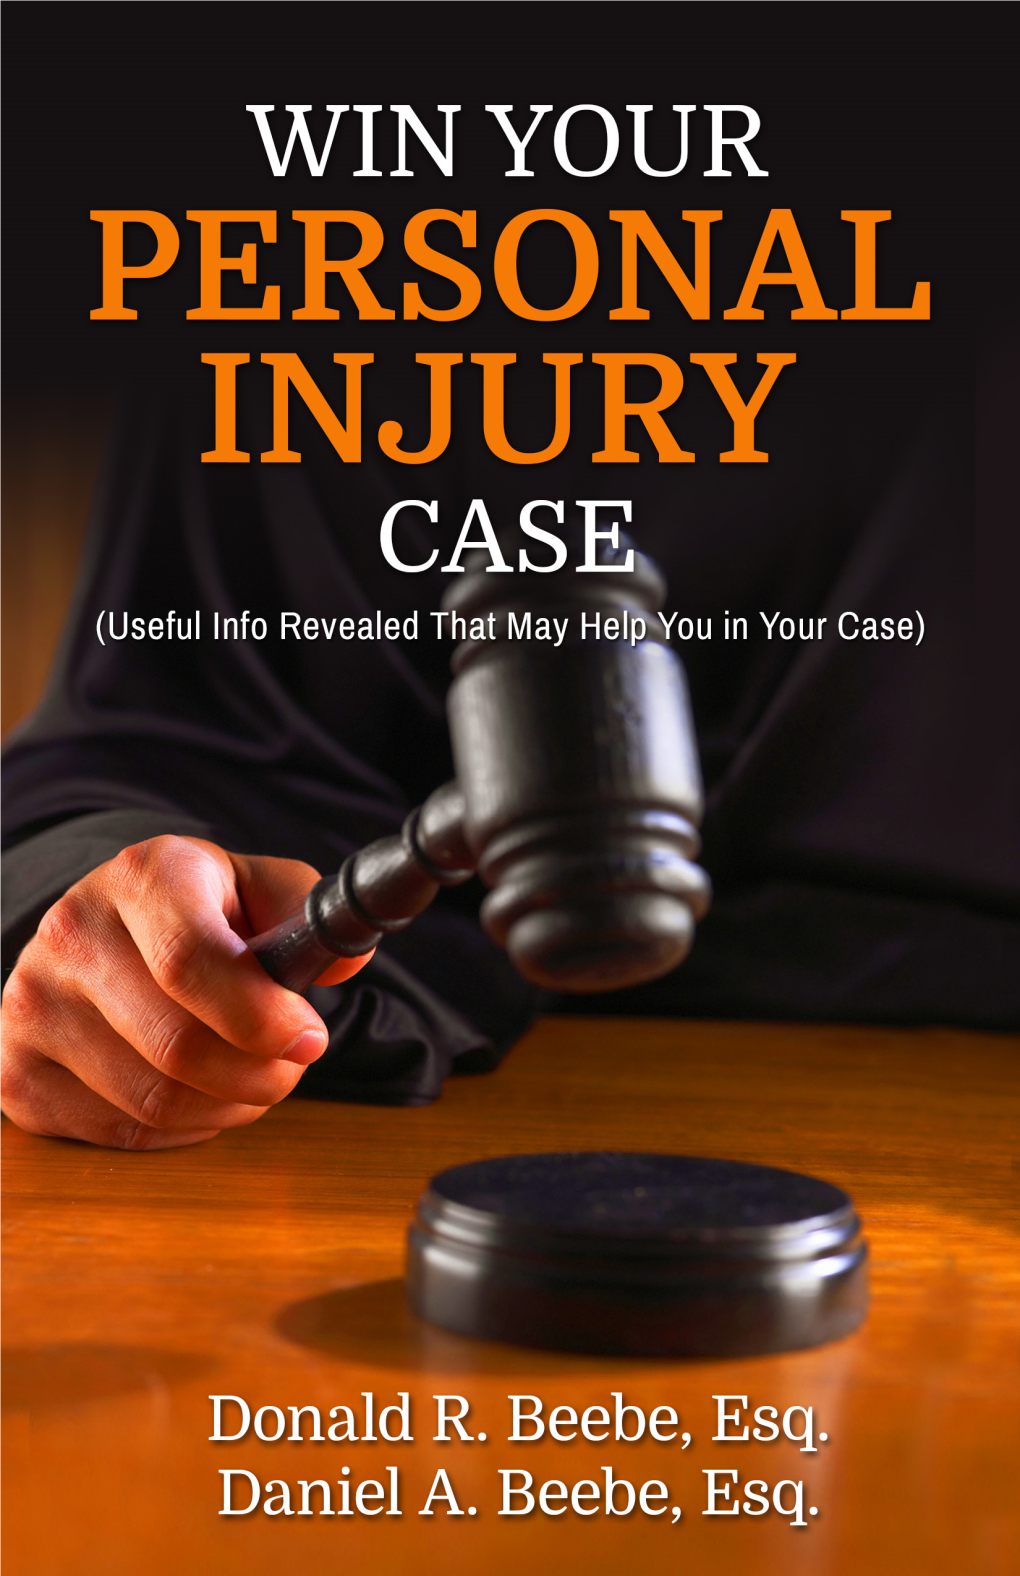 WIN YOUR PERSONAL INJURY CASE Useful Info Revealed That May Help You in Your Case